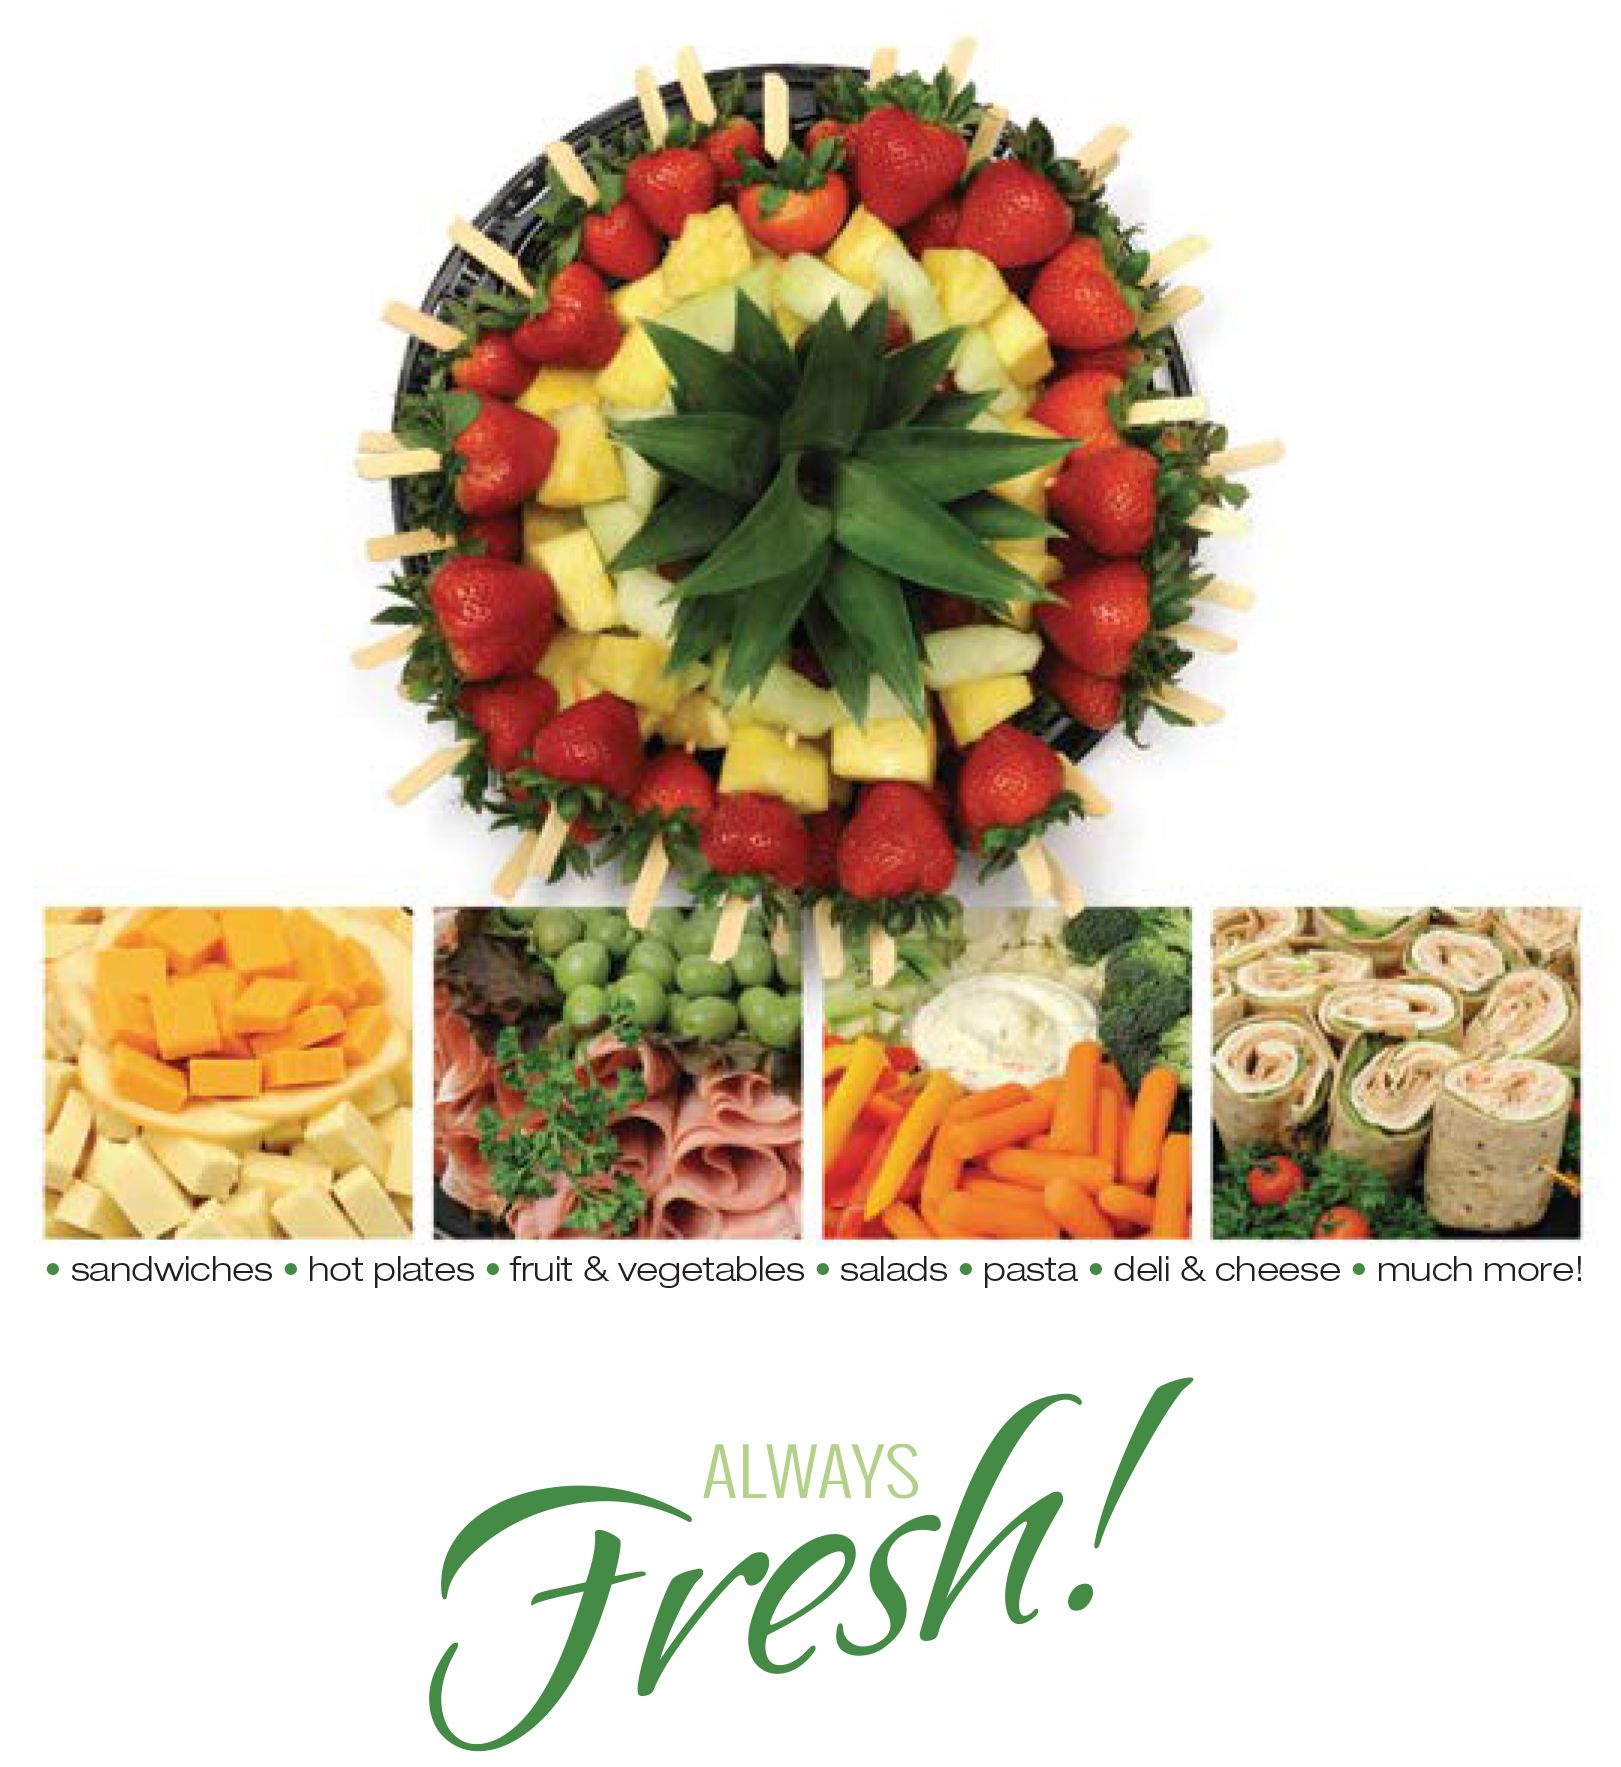 Hot plates, sandwiches, salads, pasta, cheese and deli trays, deserts. Always fresh.